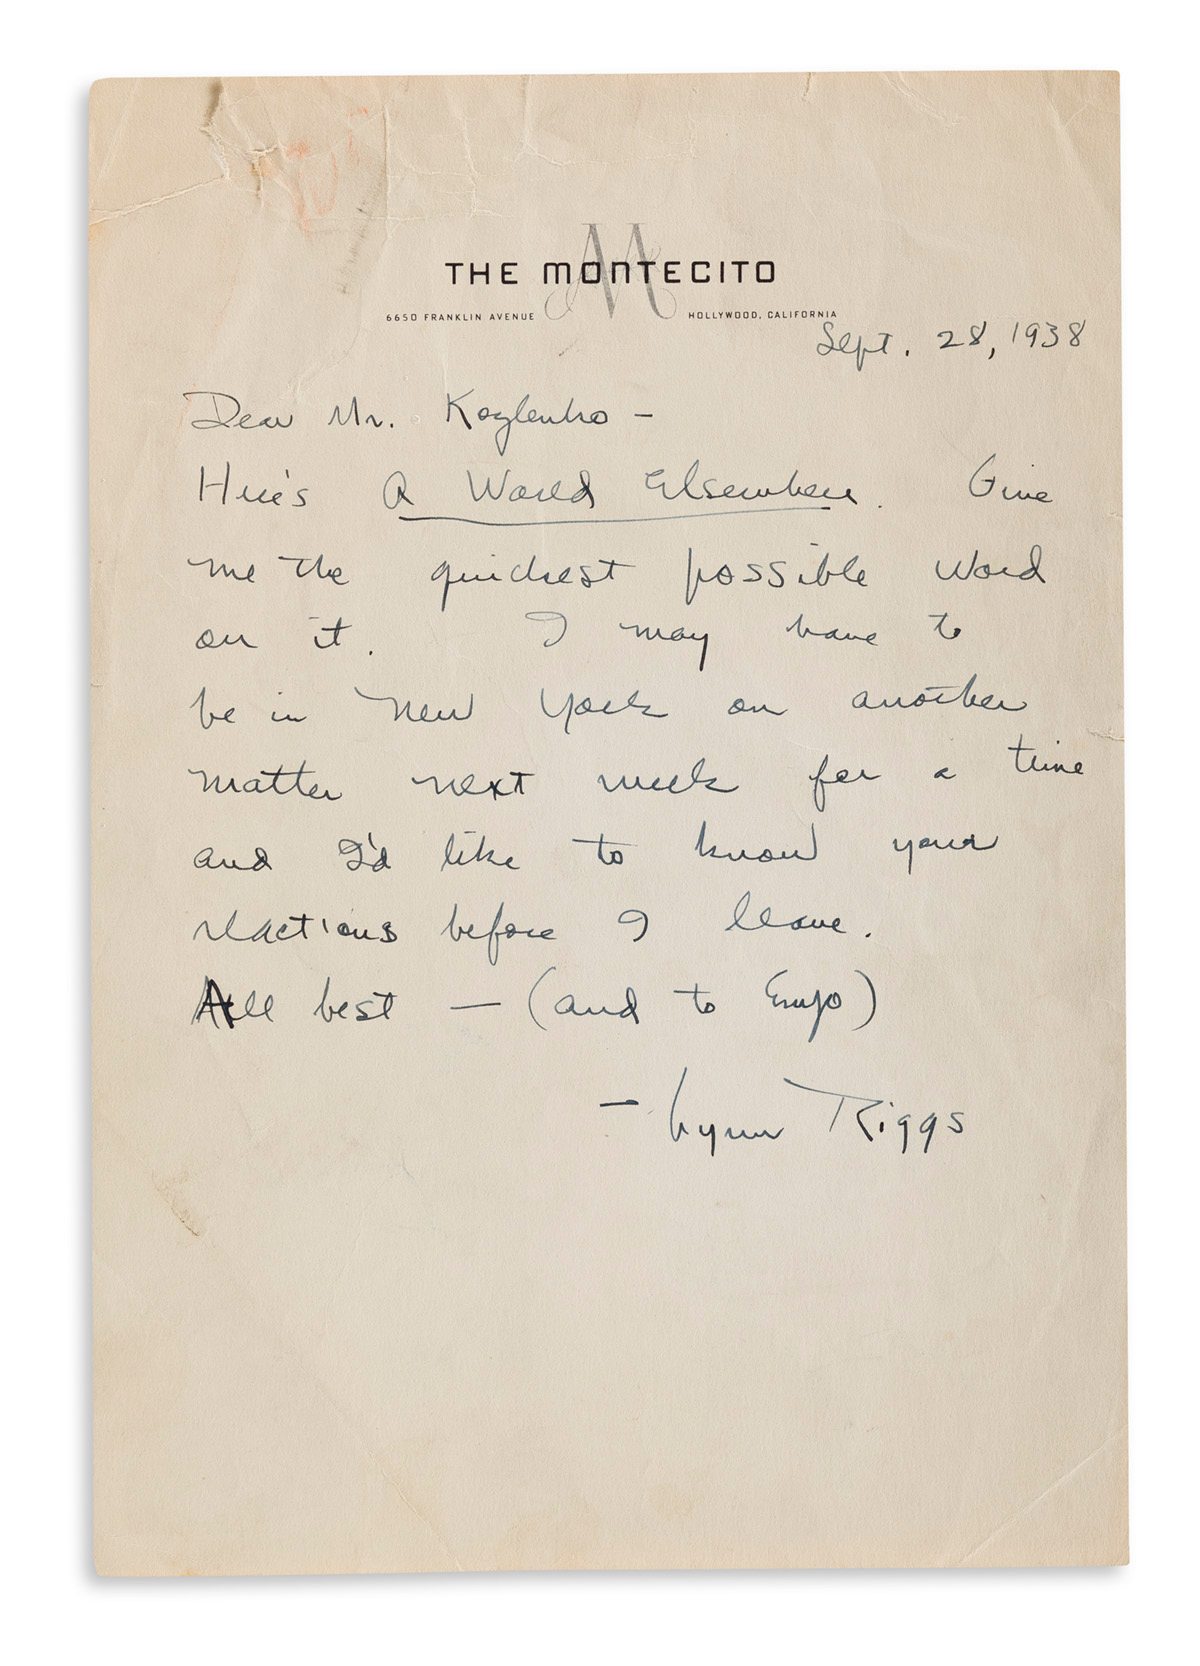 LYNN RIGGS (1899-1954) Small archive of 5 letters, each Signed, to editor William Kozlenko: Two Autograph Letters * 3 Typed Letters.